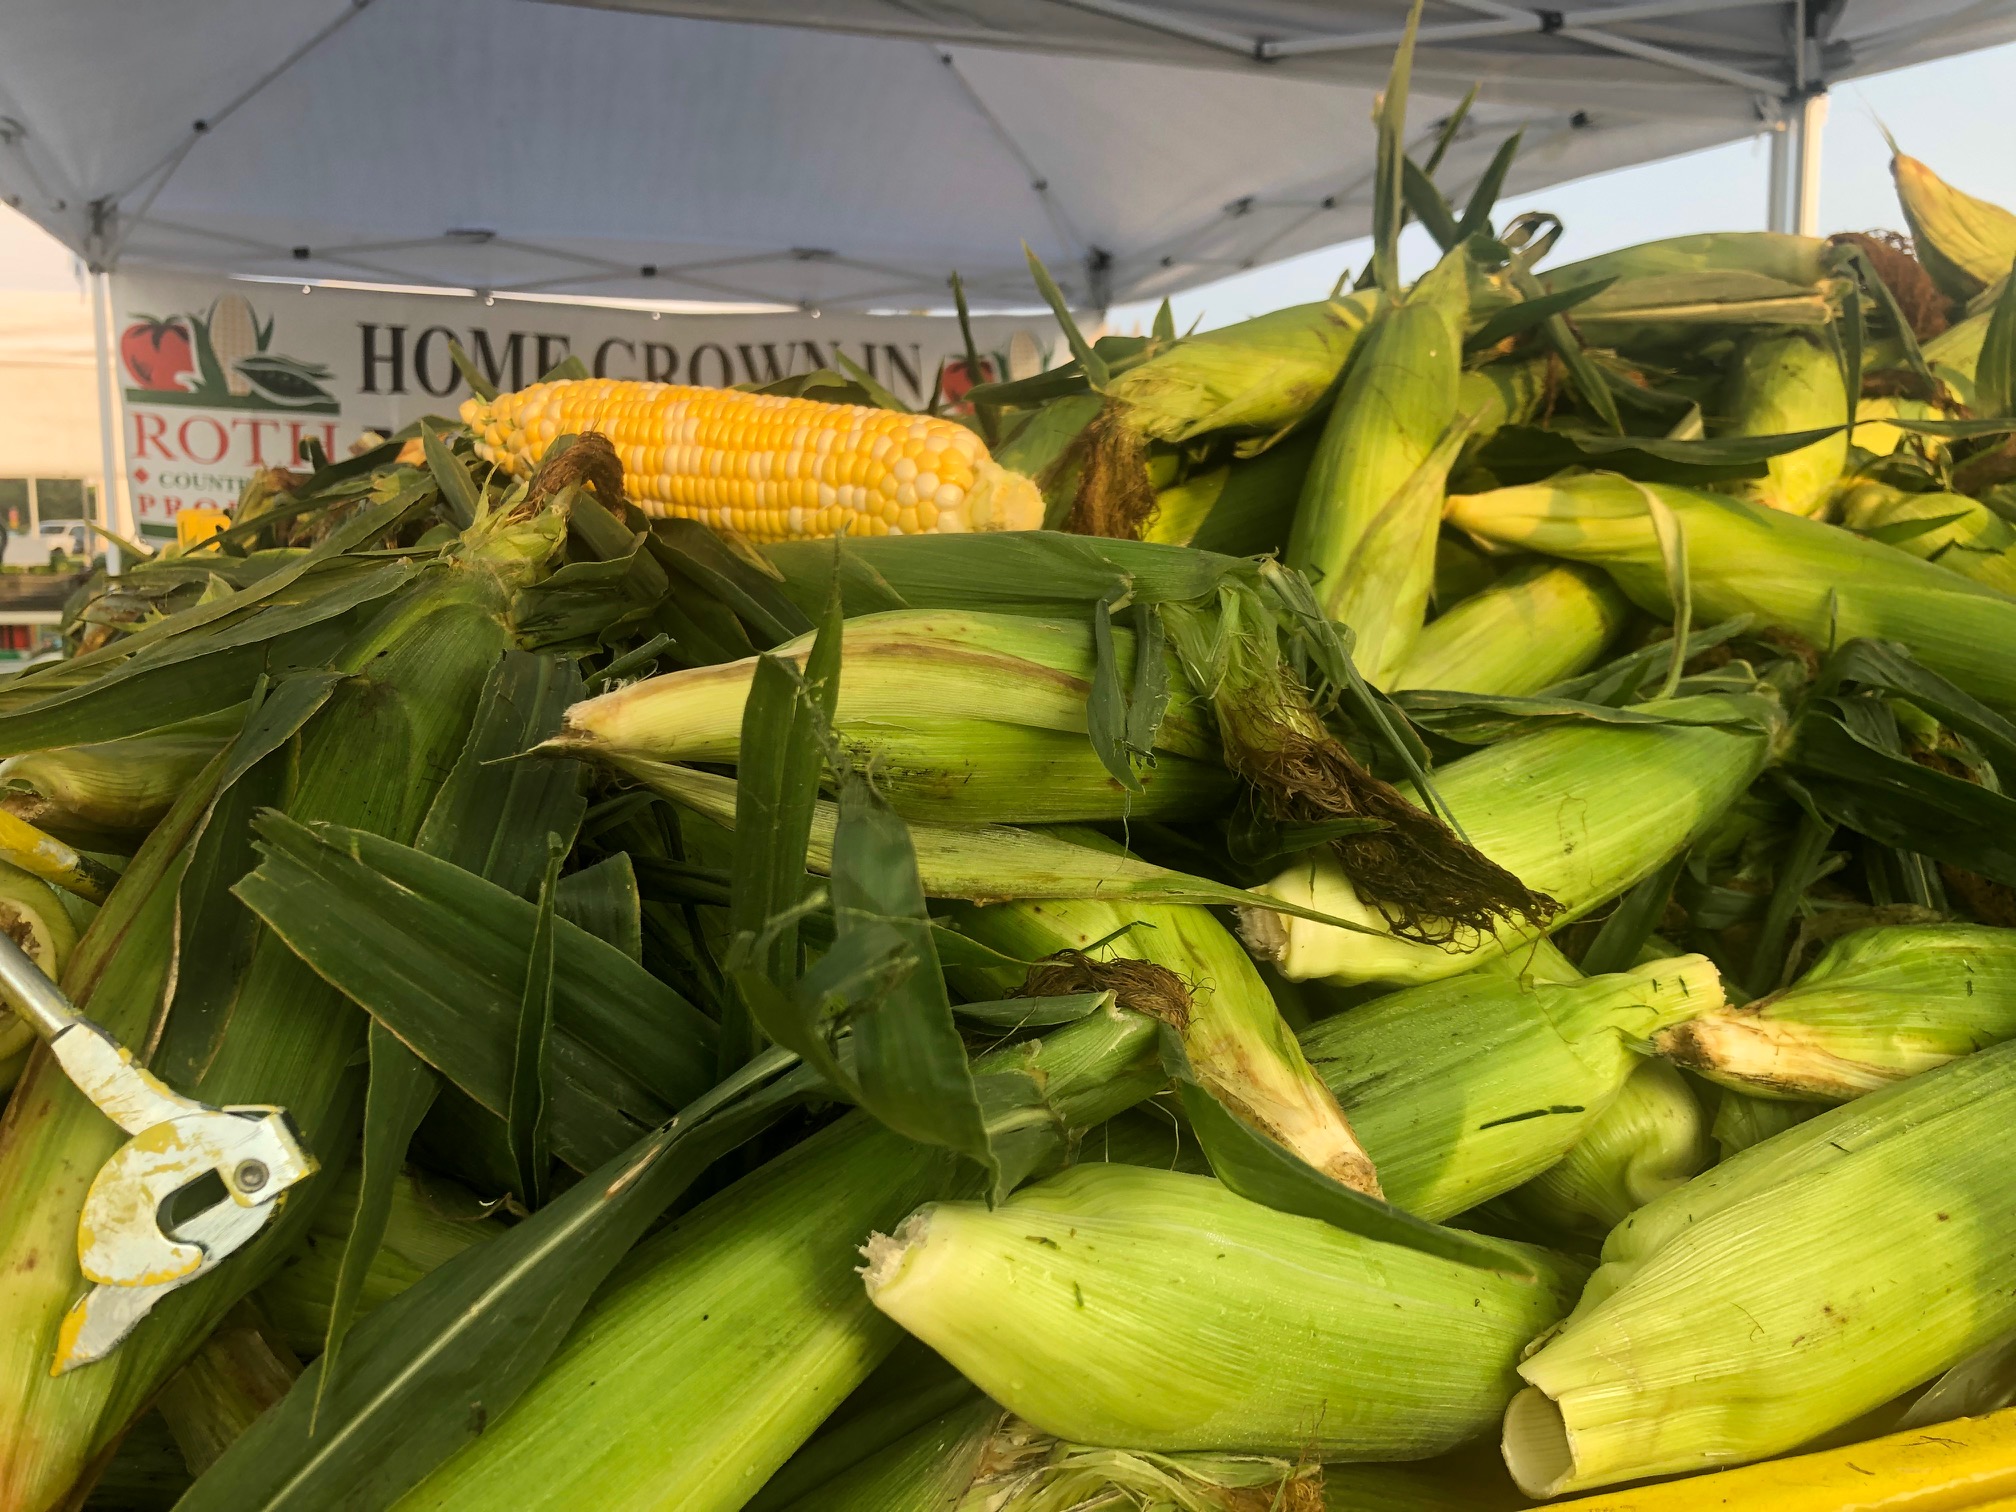 A pile of corn on the cob with the shuck on fill the frame of the photo. Photo by Alyssa Buckley.